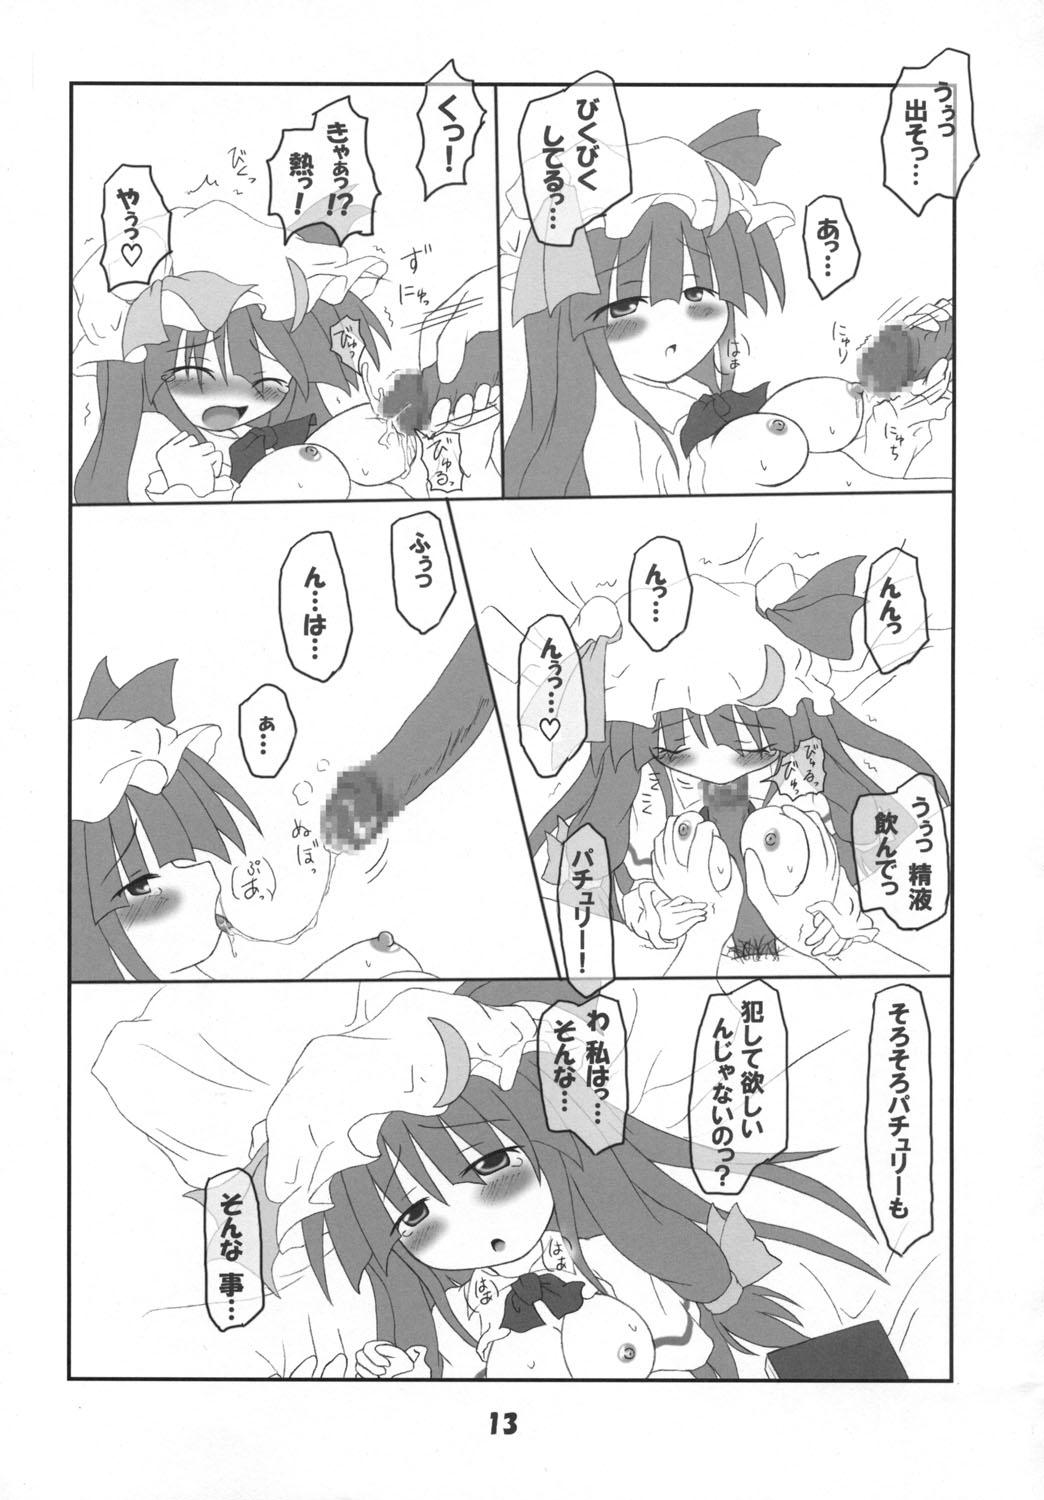 Bribe Rollin 18 - Touhou project Raw - Page 12